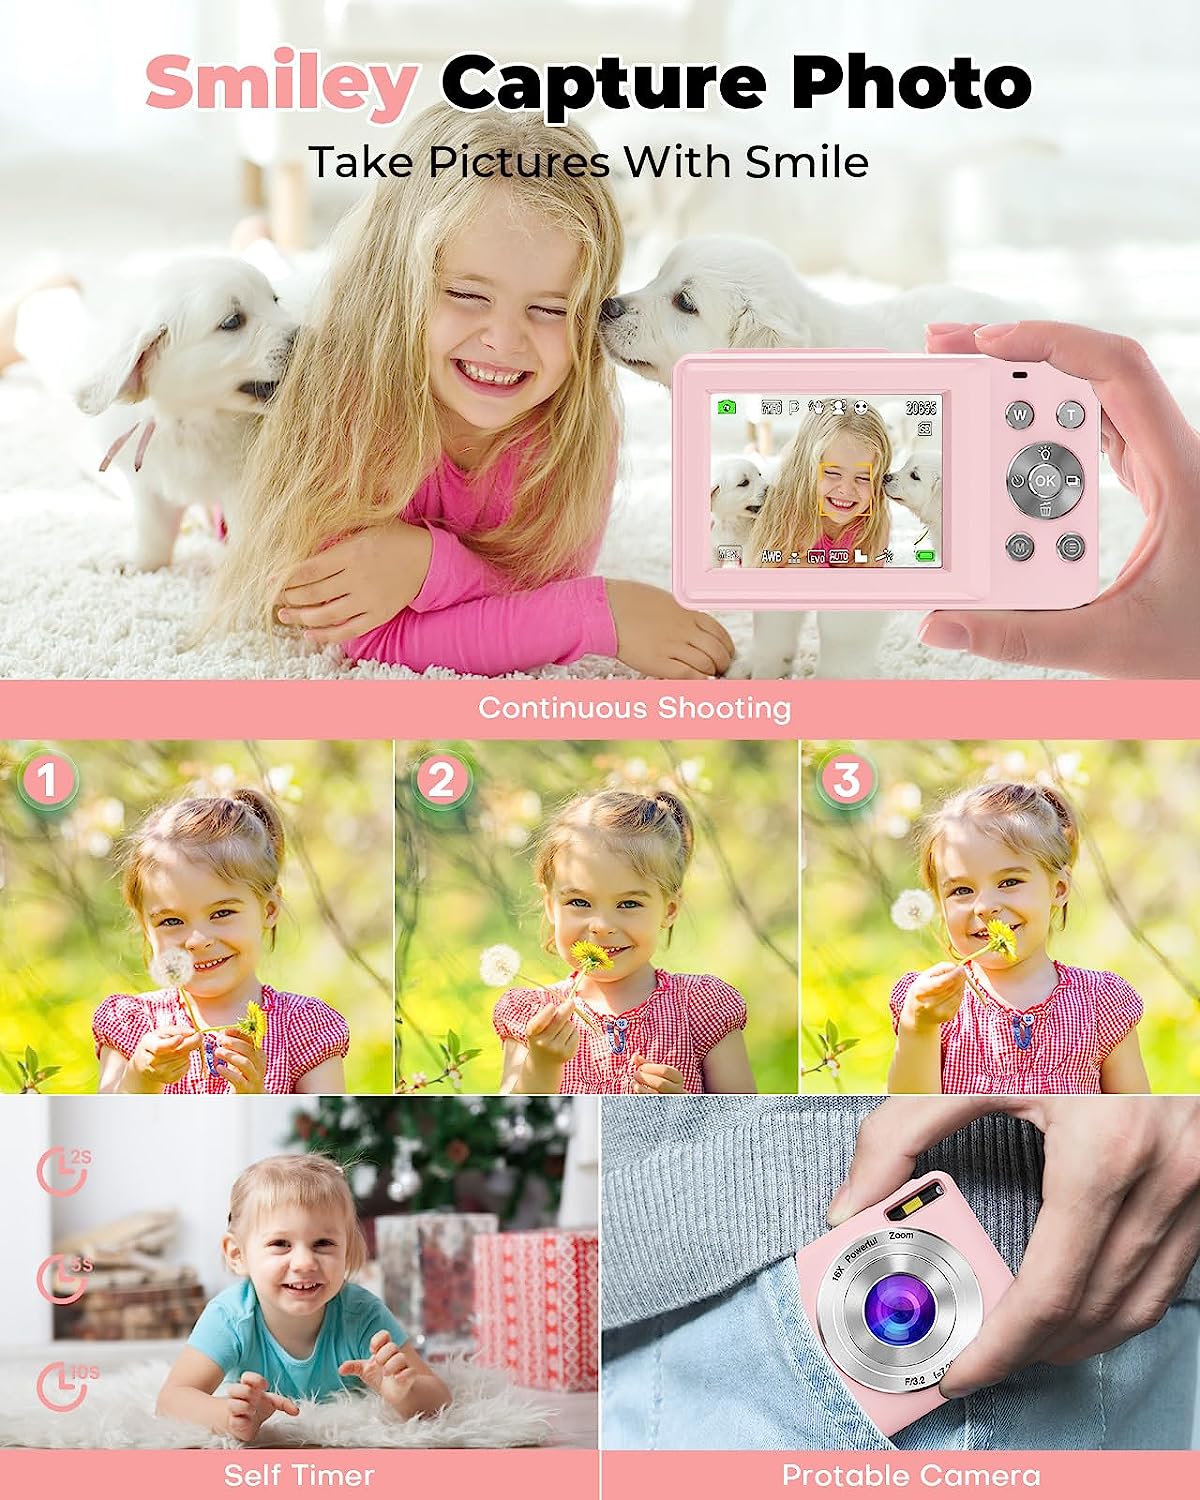 Digital Kids Camera with 32GB Card, Nsoela FHD 1080P 44MP Compact For Vlogging, Edge and Shoot 16X Zoom, Portable Mini Kids for Teens Students